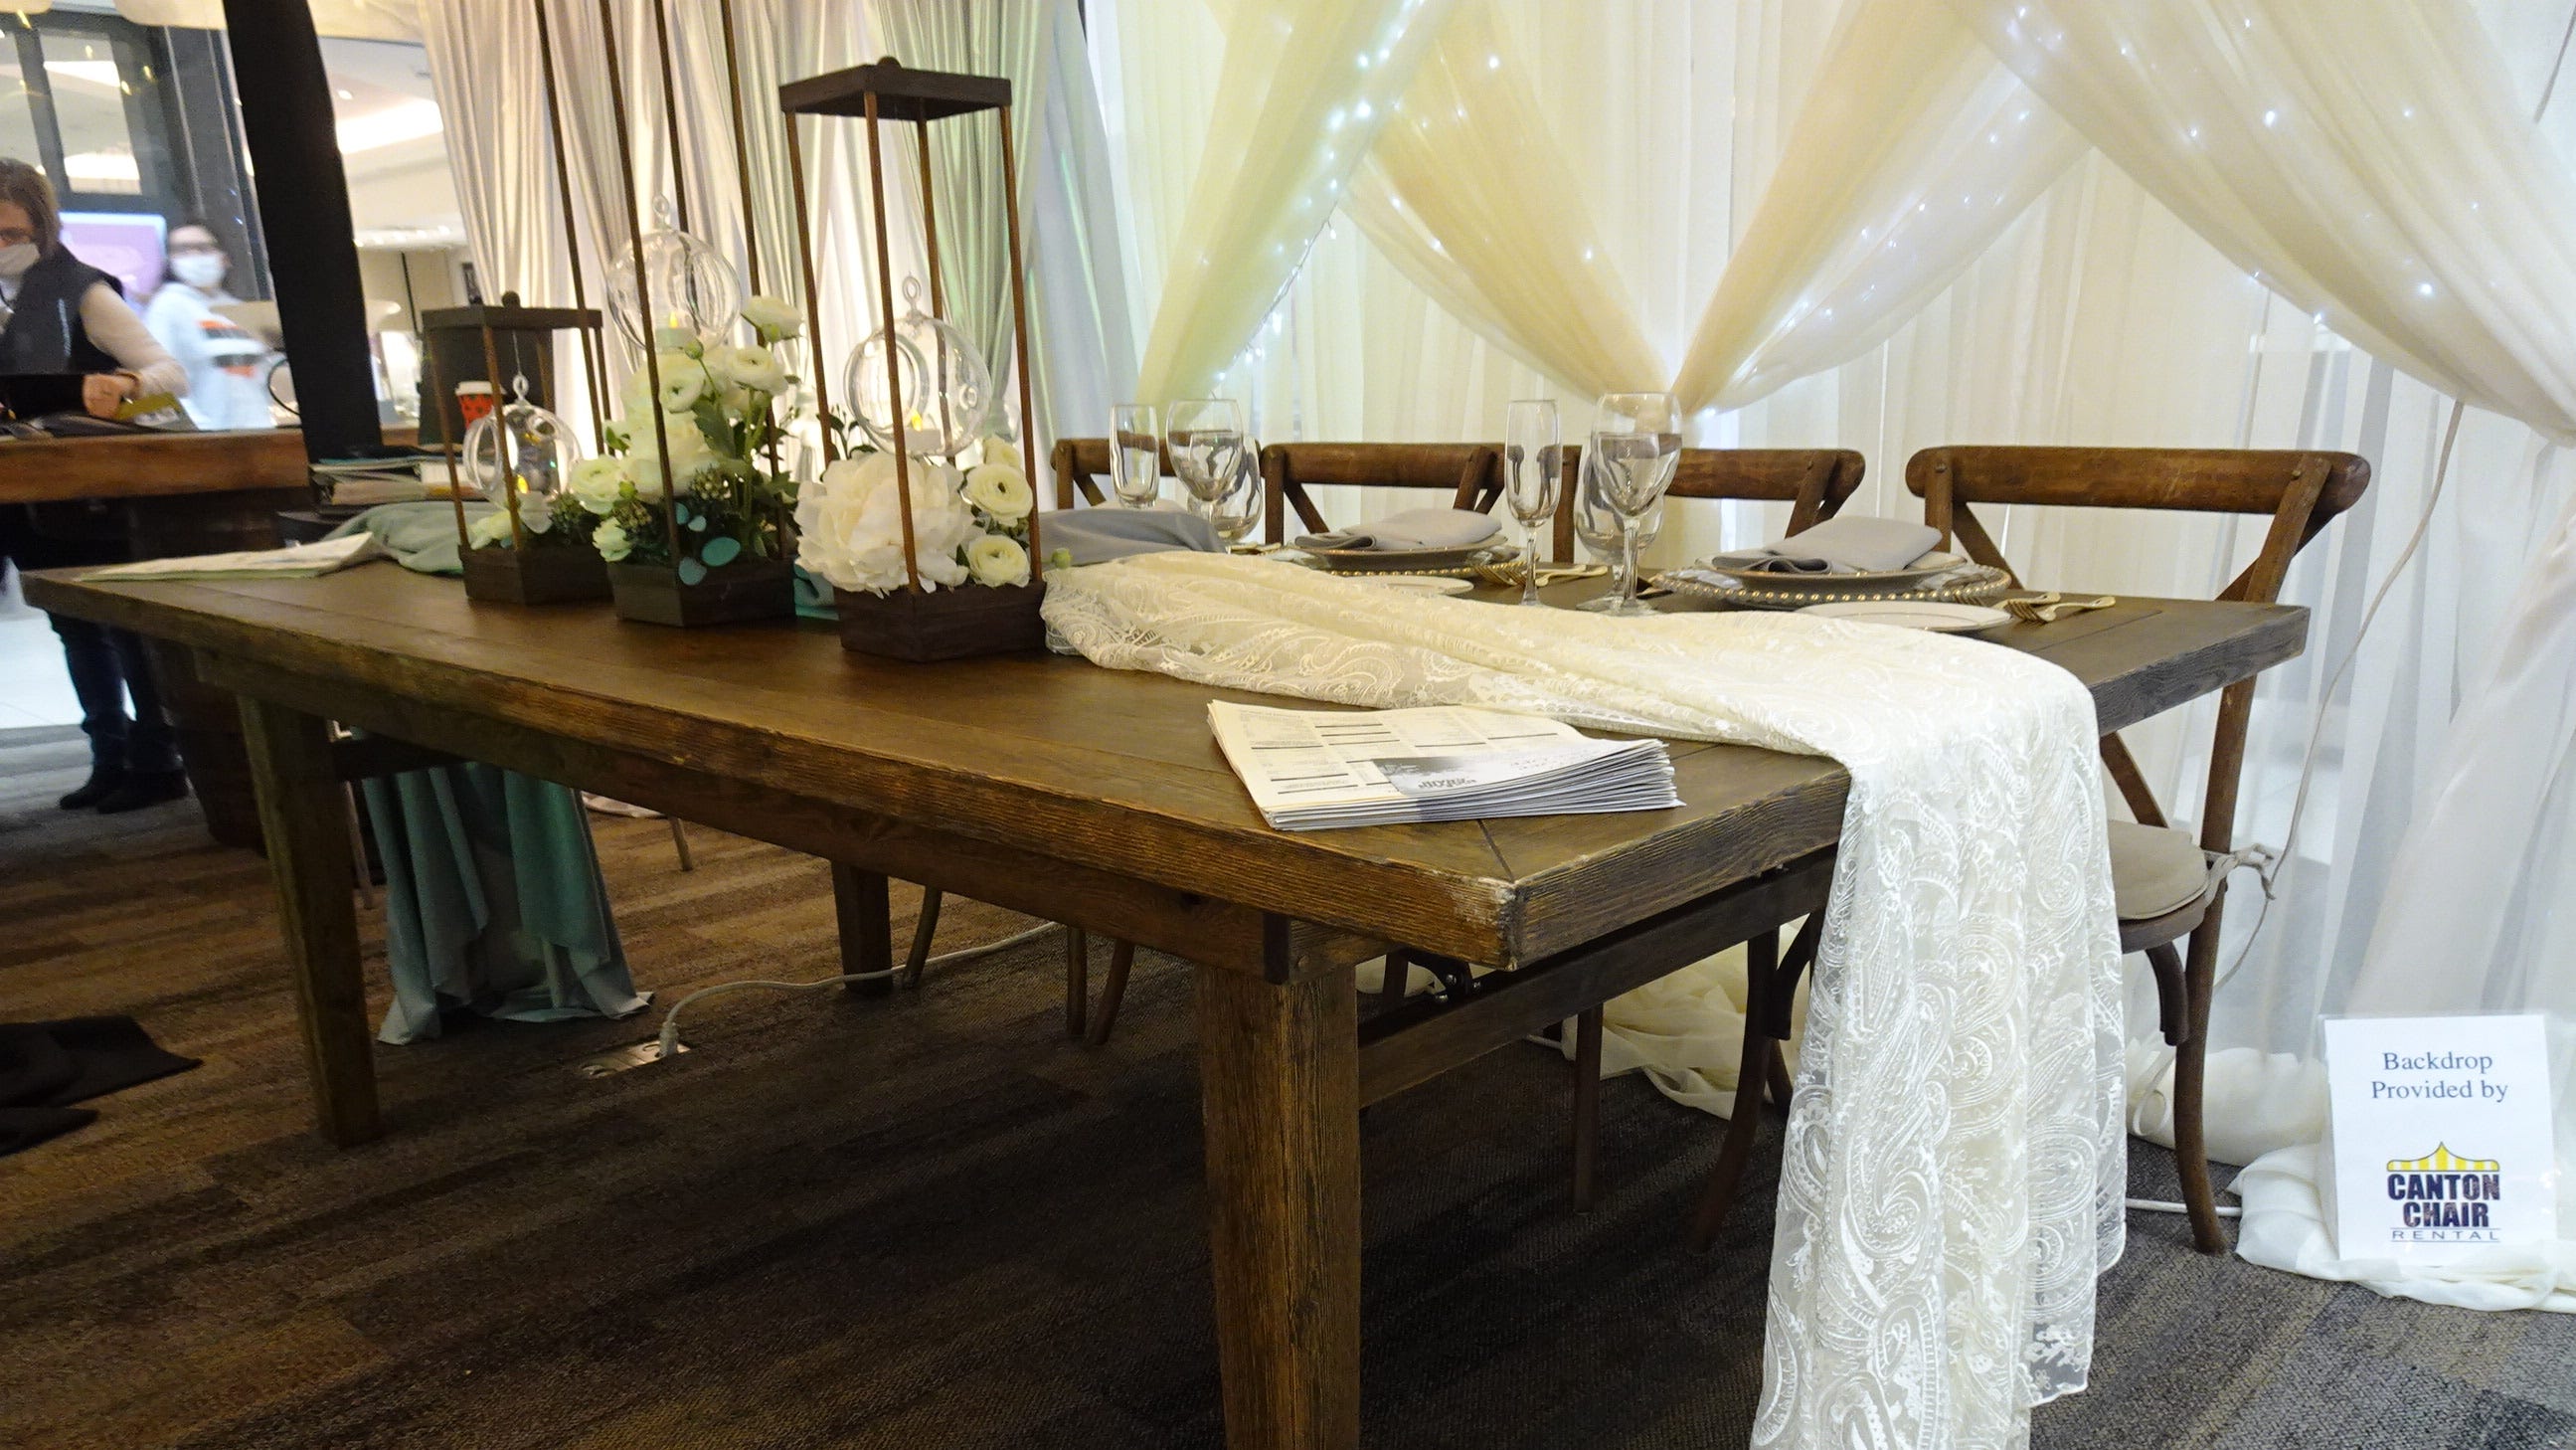 This rustic style table and farm chairs was setup at the Canton Chair Rental booth. Store manager Anne Haines said rustic and vintage rustic furniture is still highly popular this year.